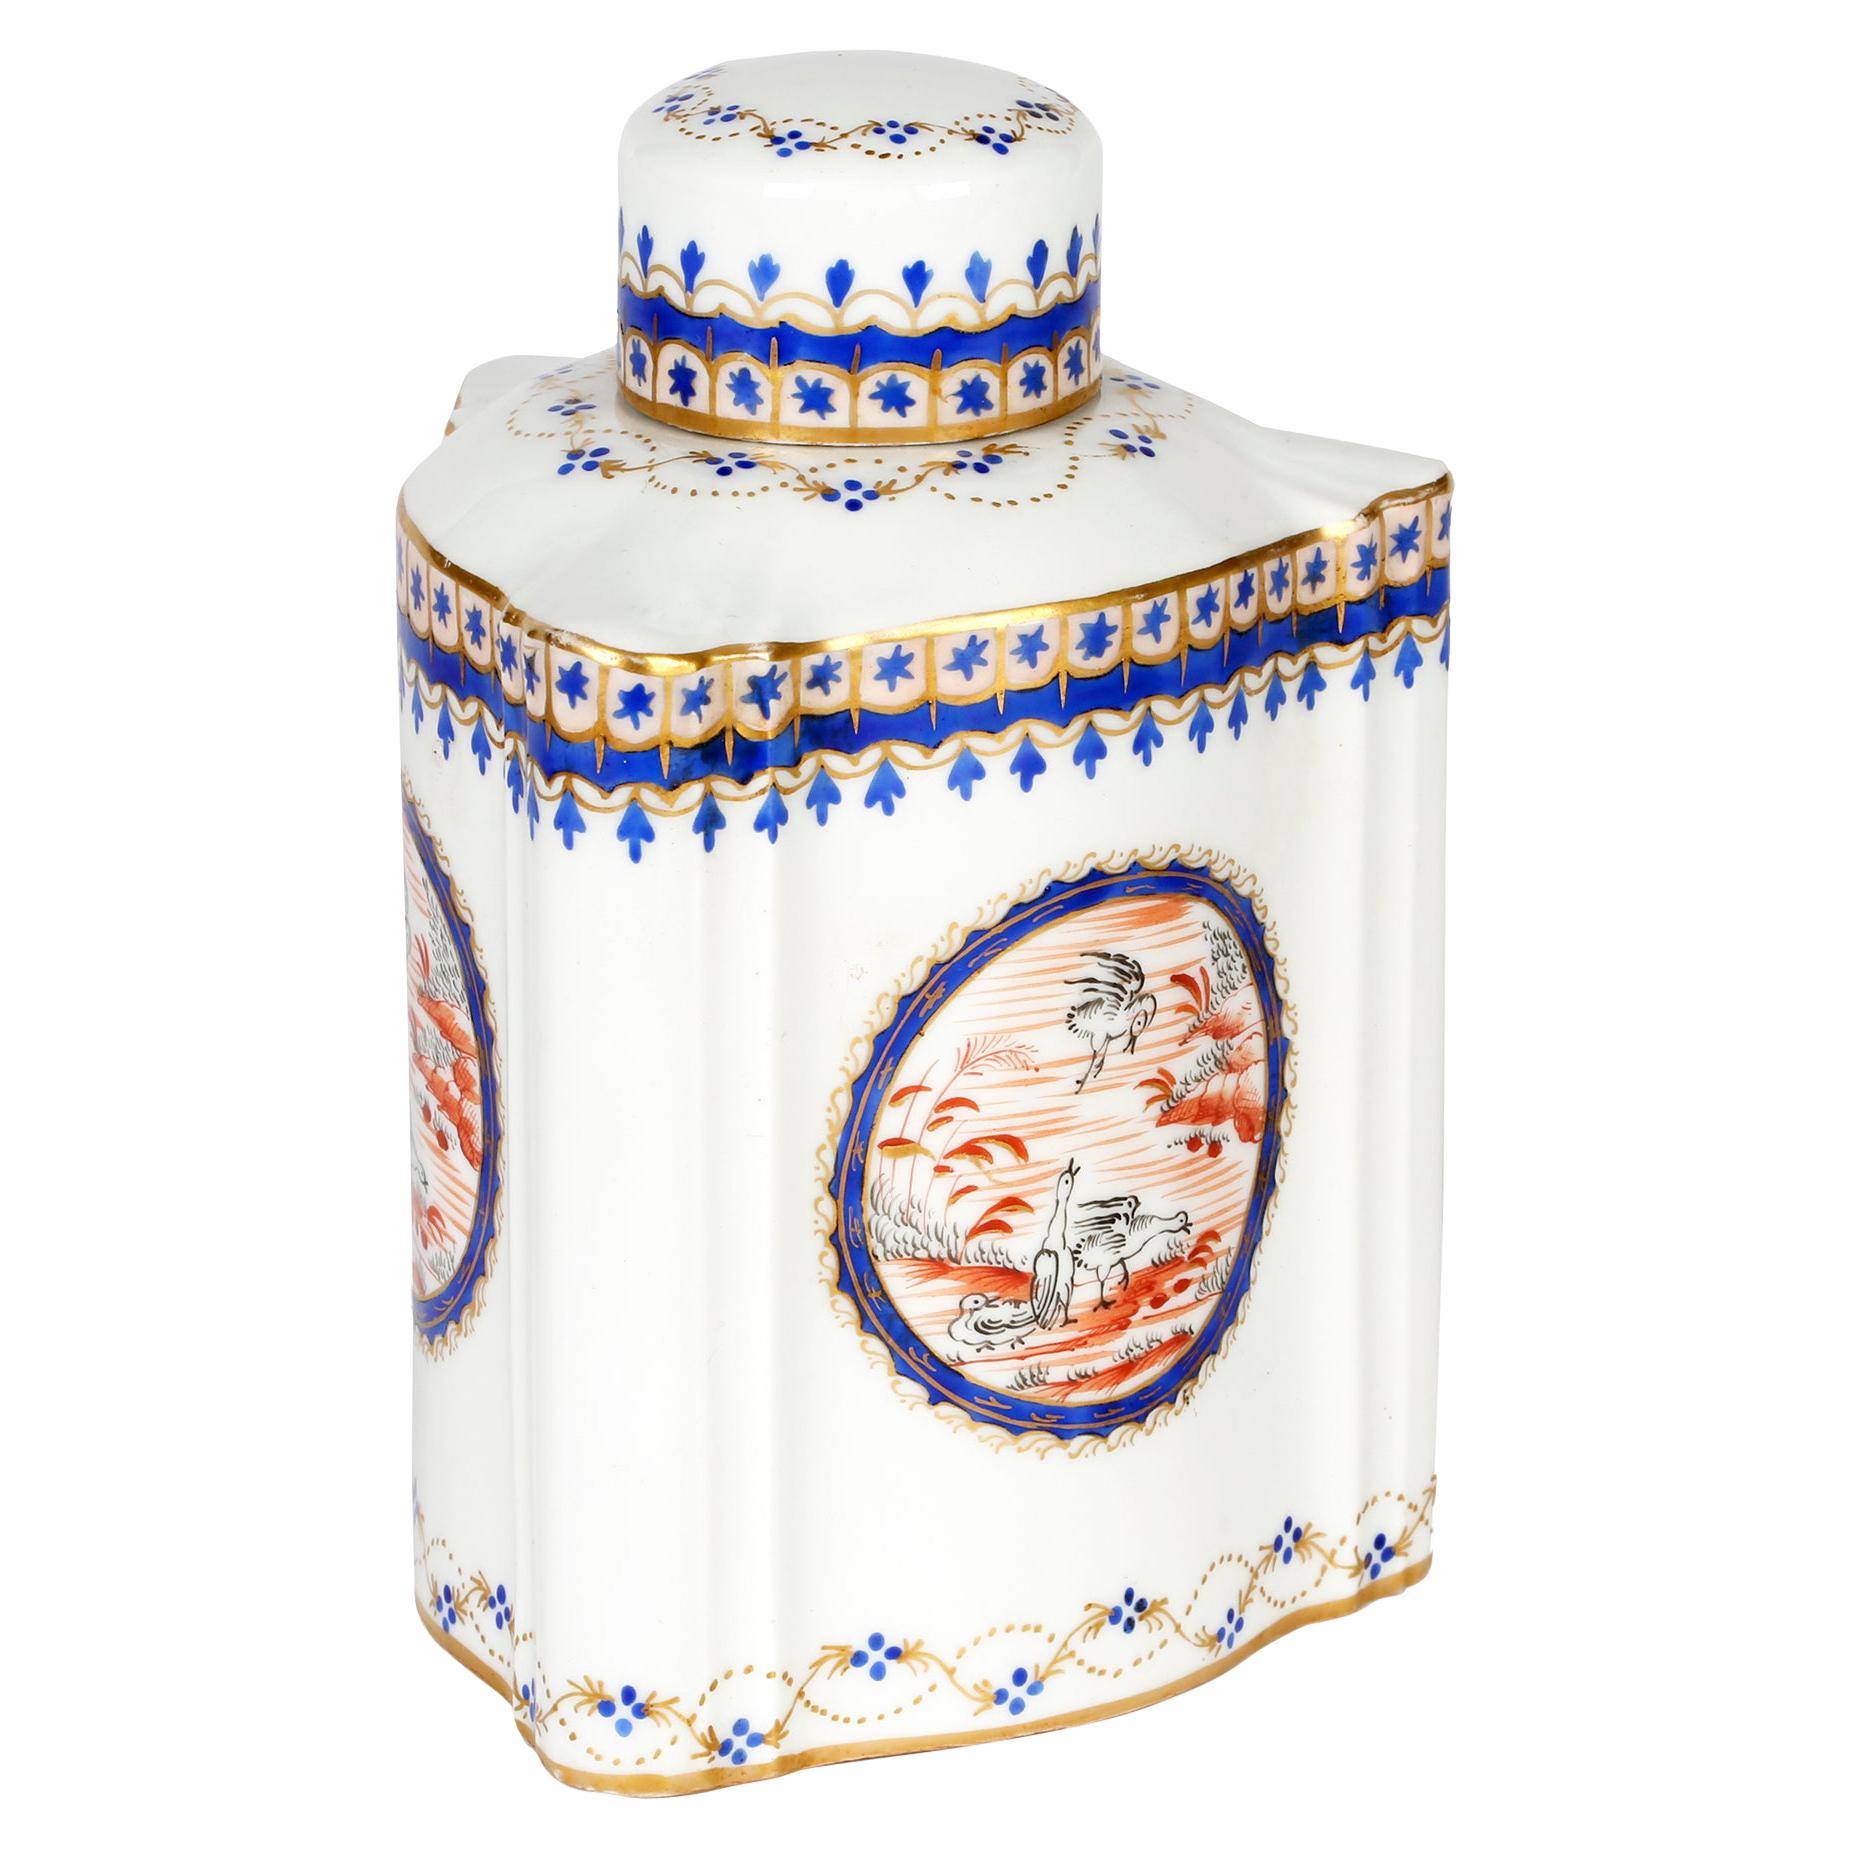 Samson French Porcelain Chinese Style Triangular Lidded Teacaddy For Sale